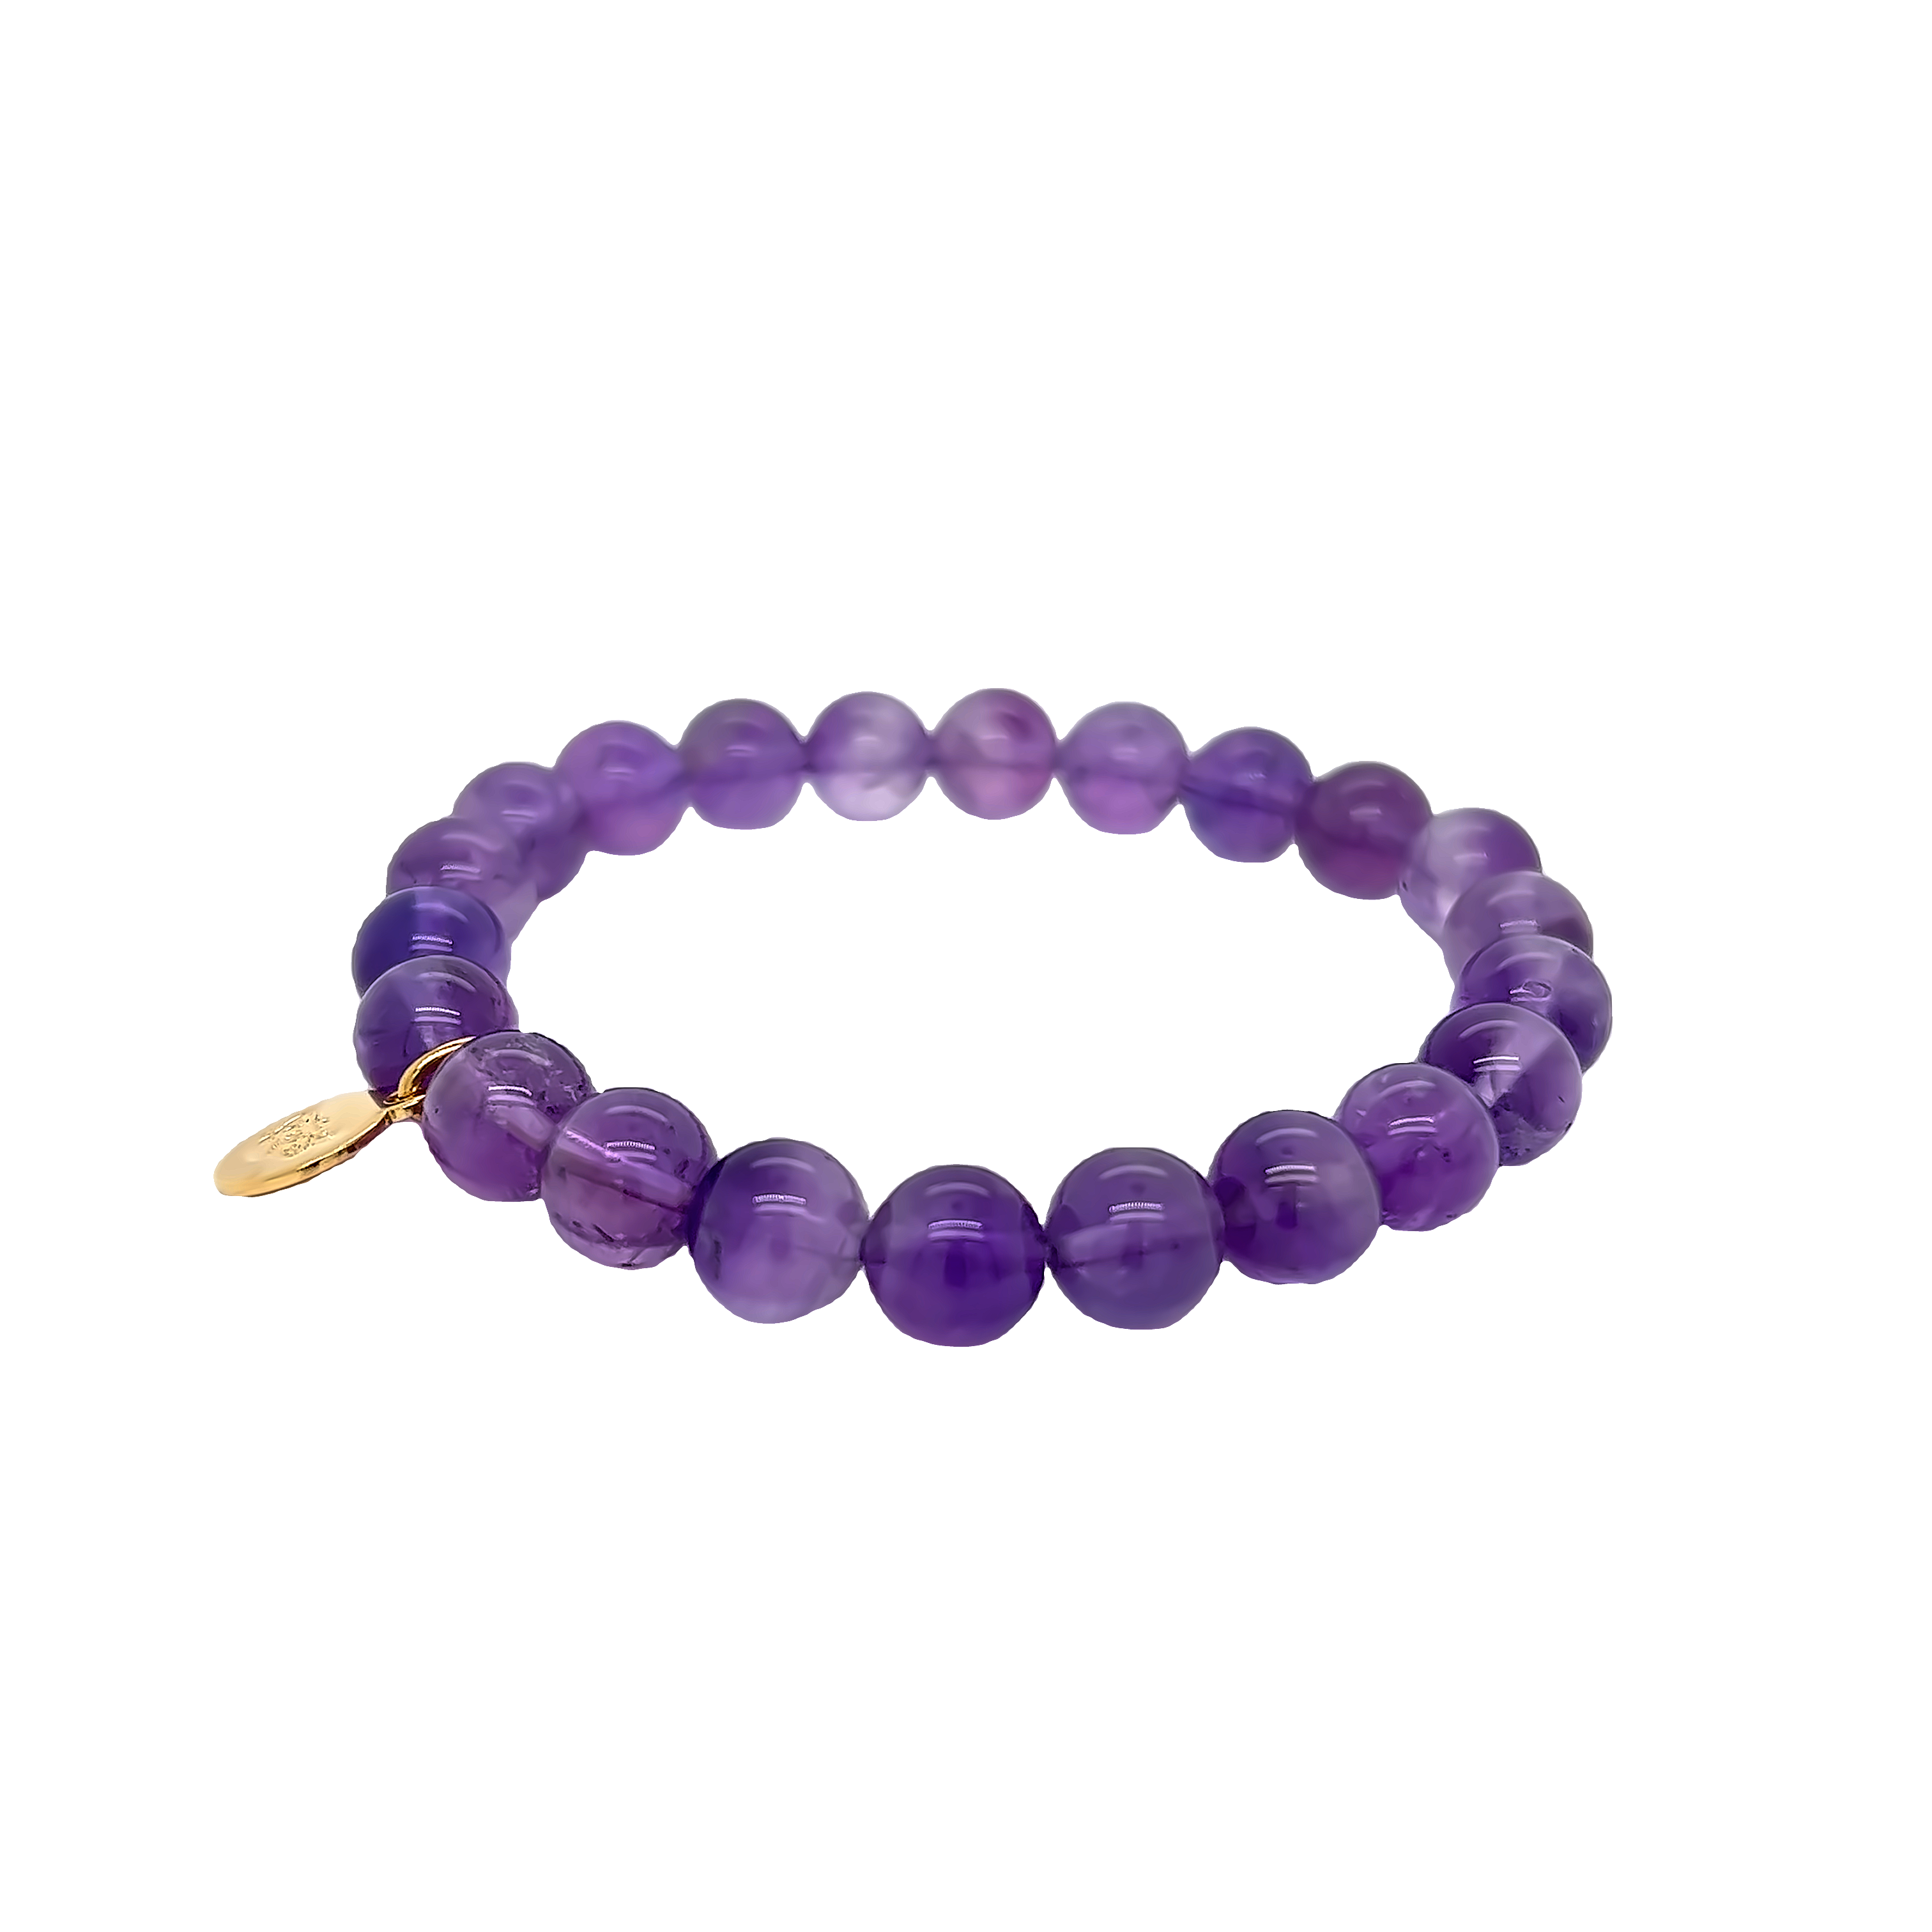 8mm Amethyst bead bracelet for charity Heartly House